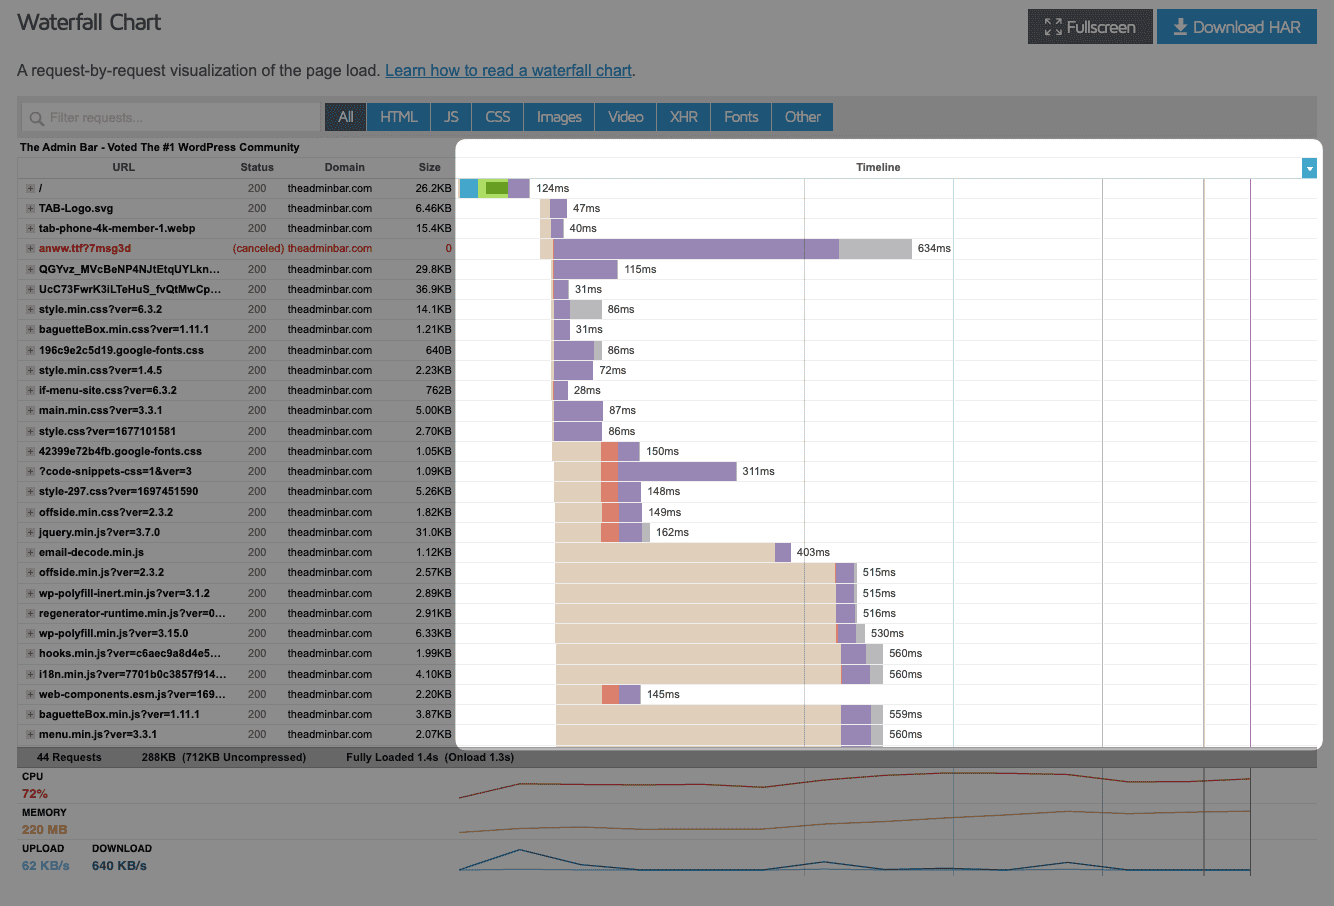 A screenshot of the timeline on the waterfall chart